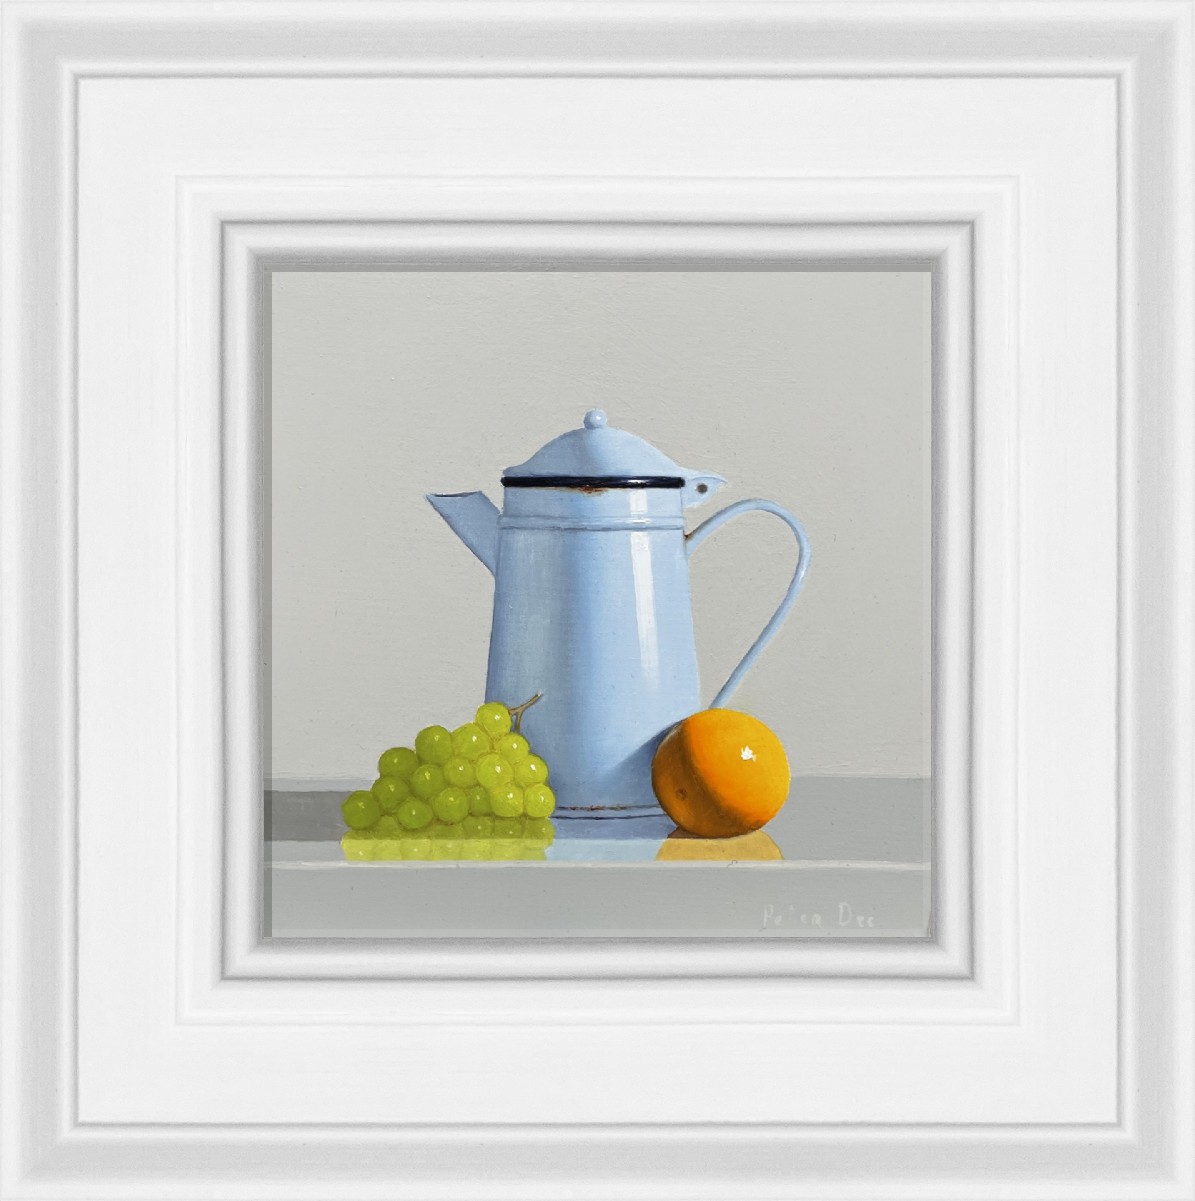 Vintage Blue Coffee Pot with Grapes and Orange by Peter Dee